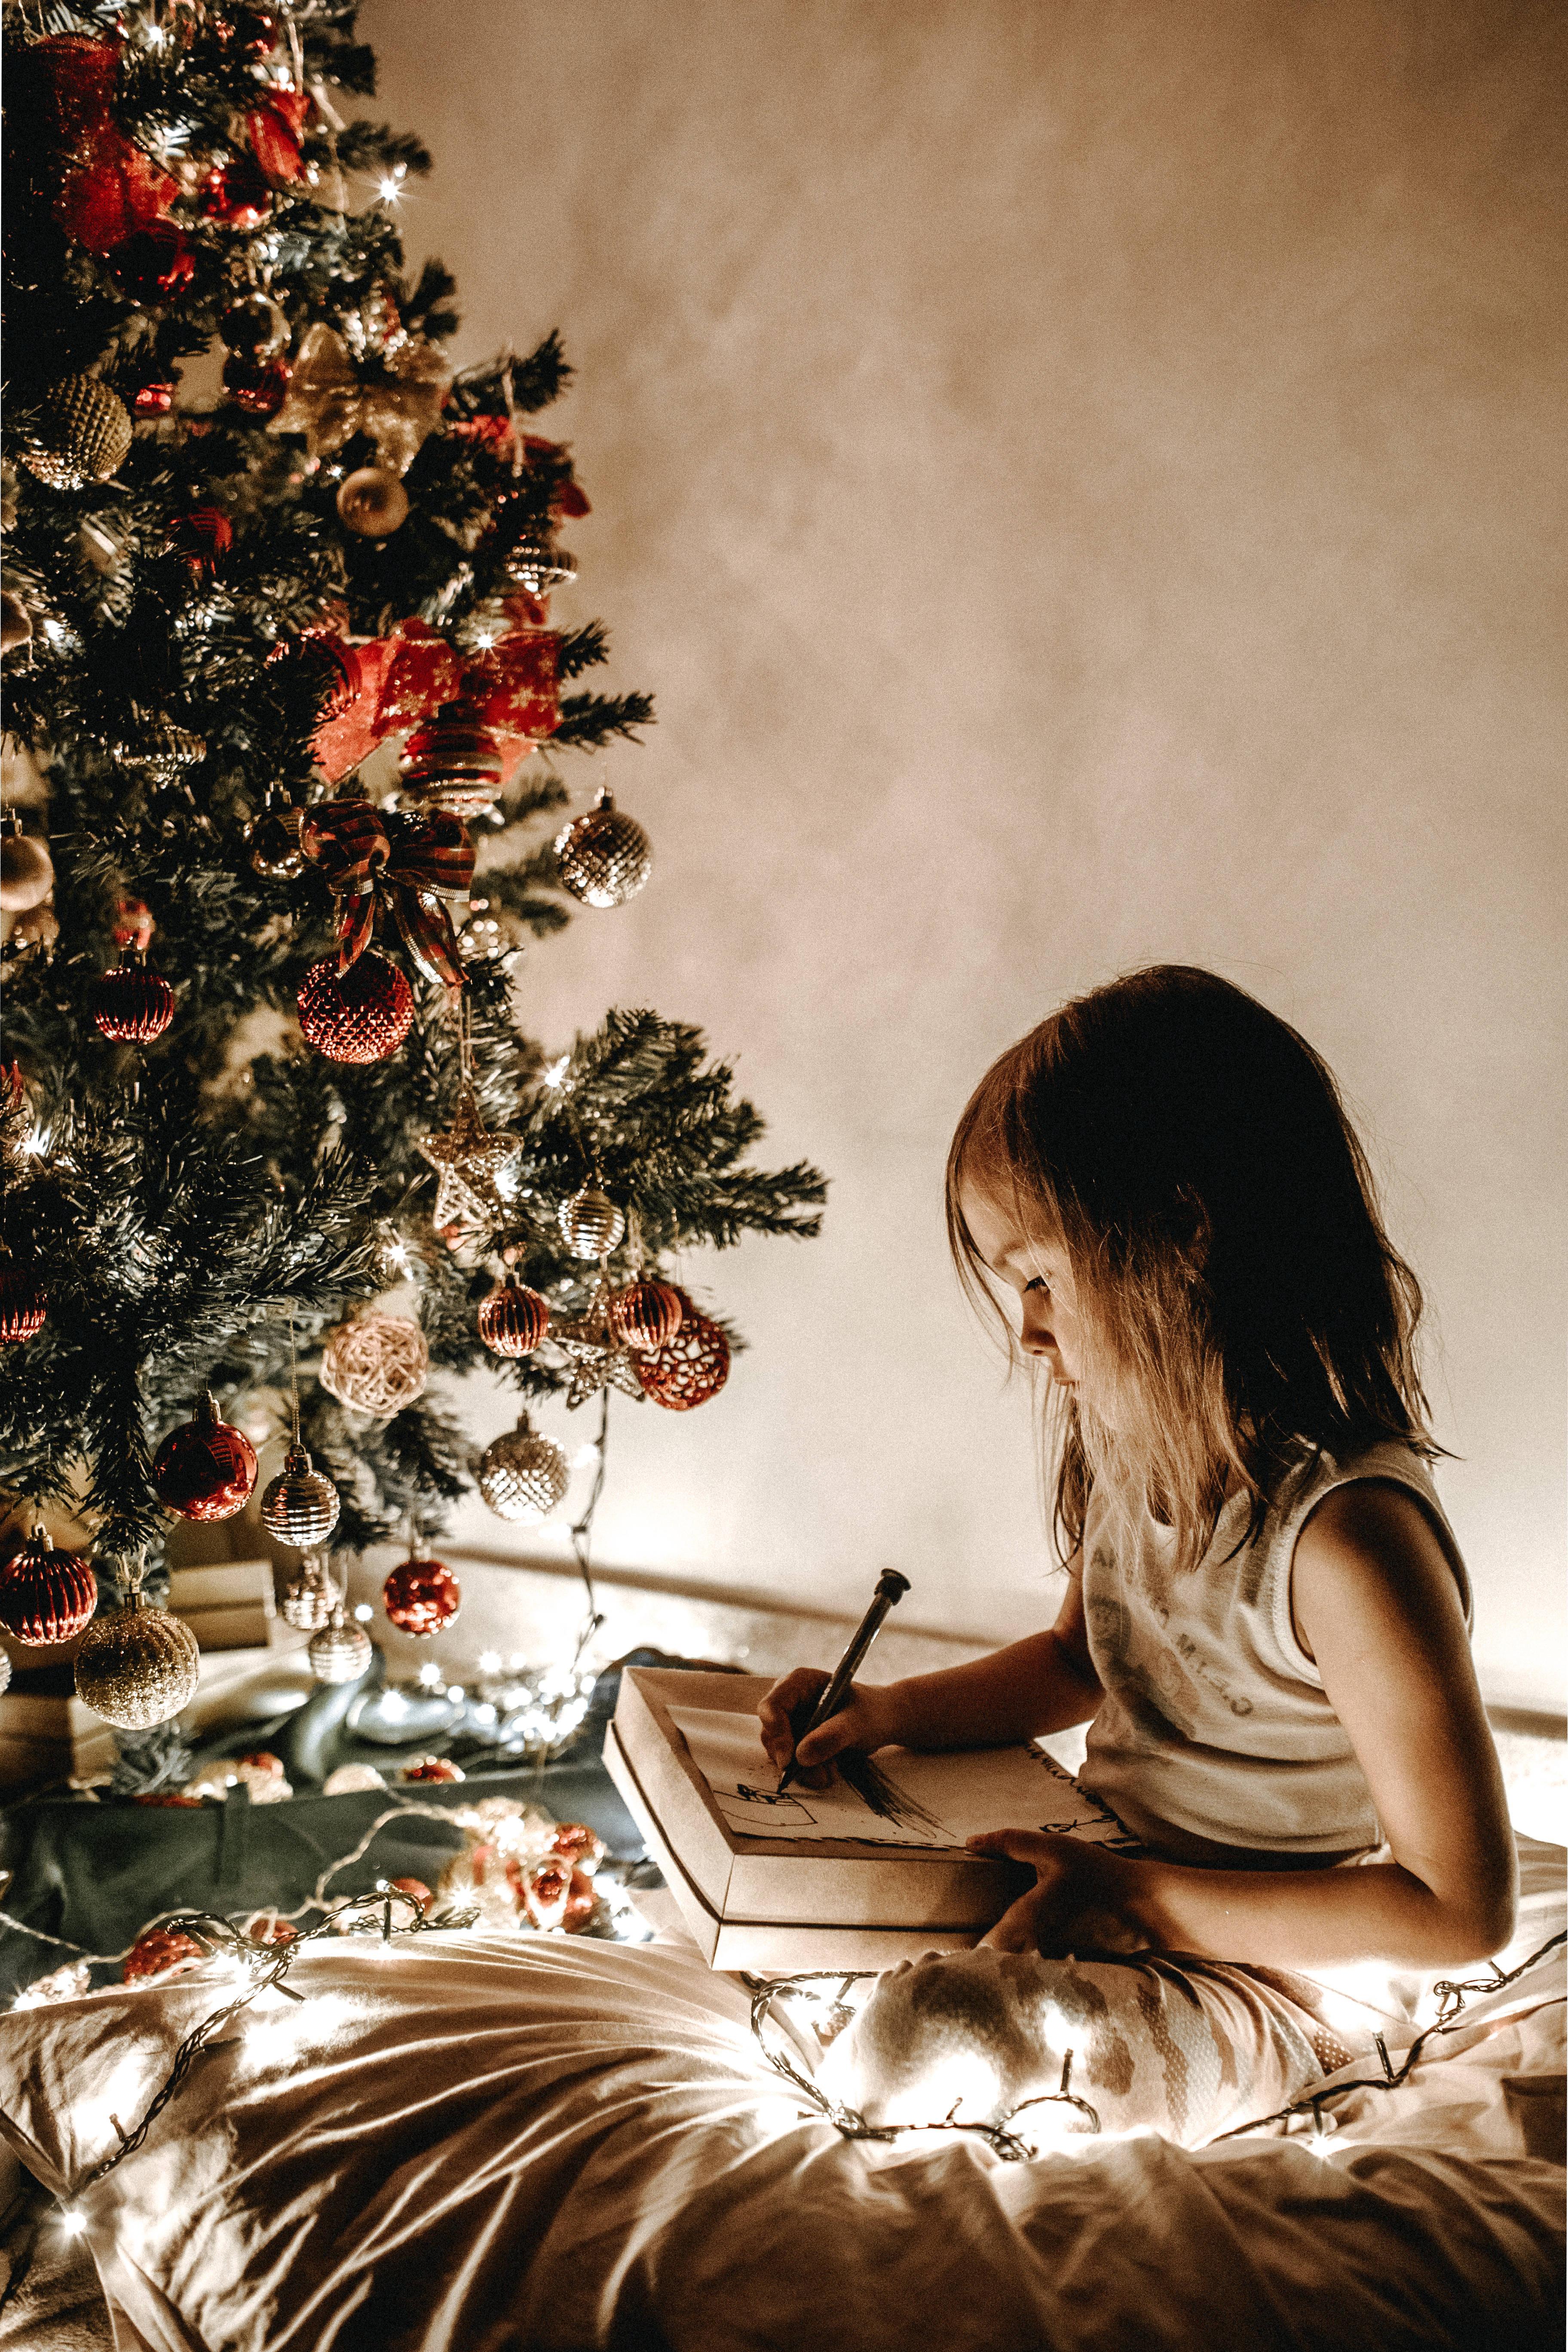 An Adorable Little Girl Sits In The Middle Of A Festive